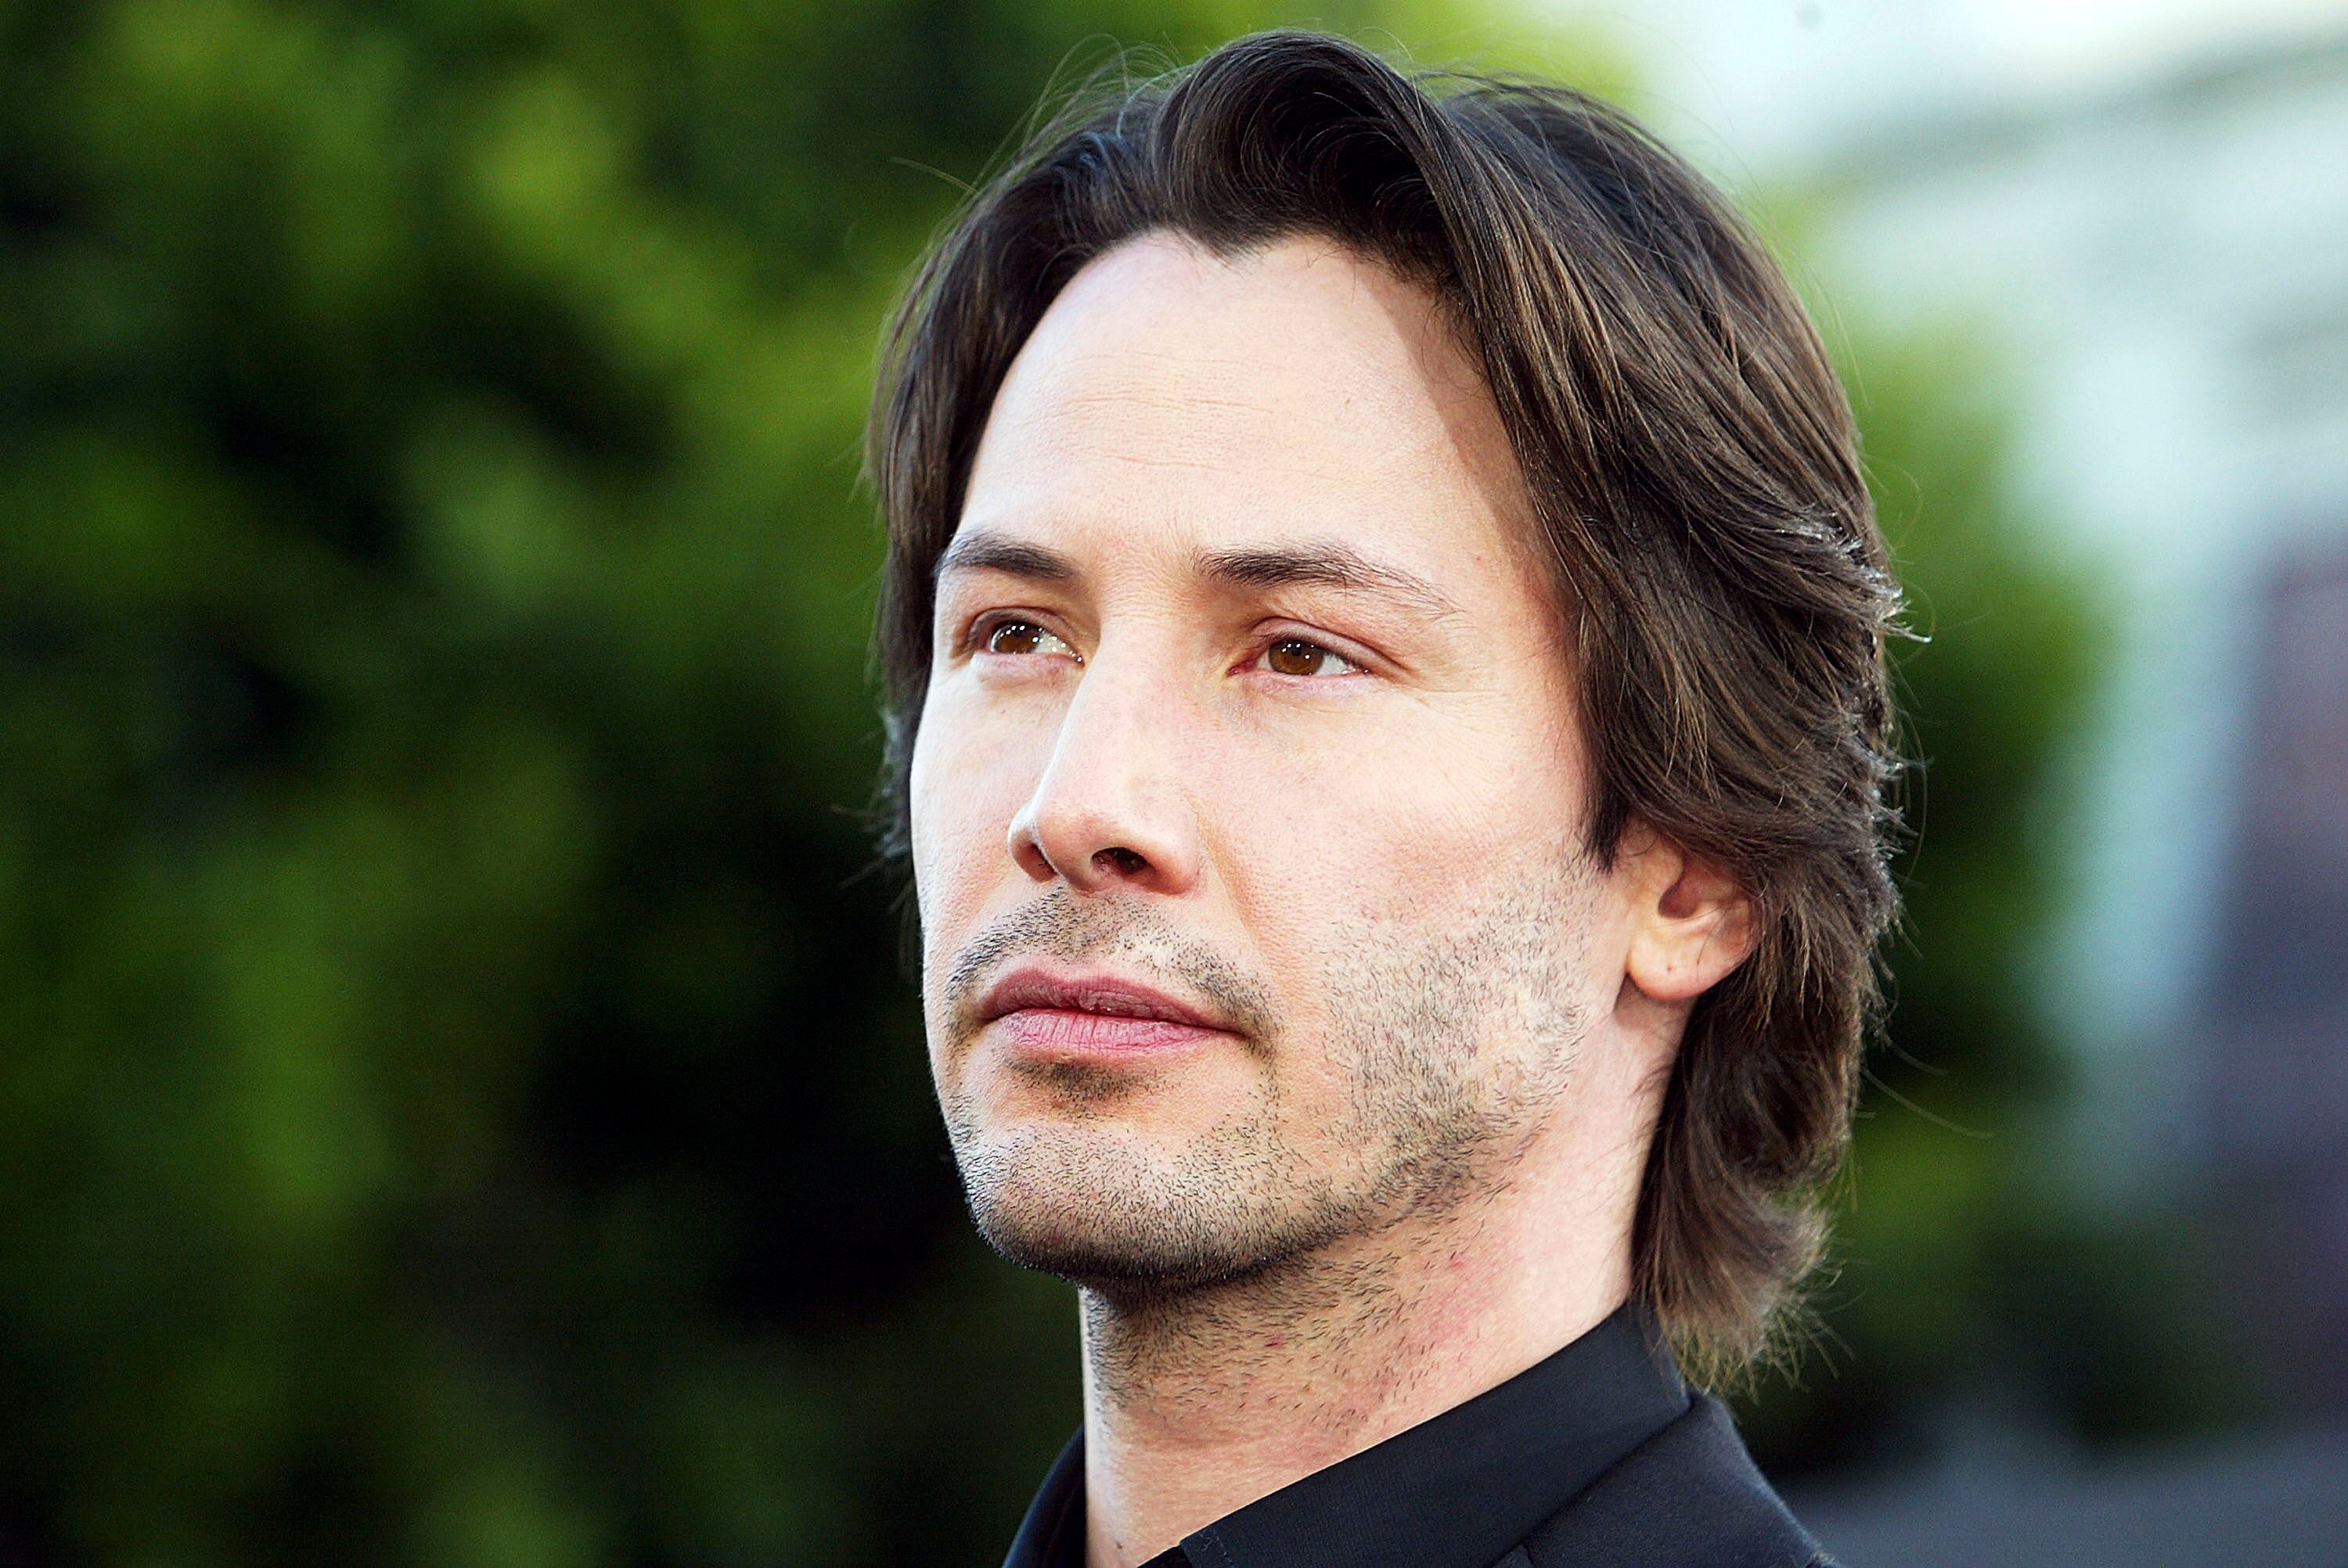 Keanu Reeves arrives at the premiere of "The Matrix Reloaded" at the Village Theater | Getty Images